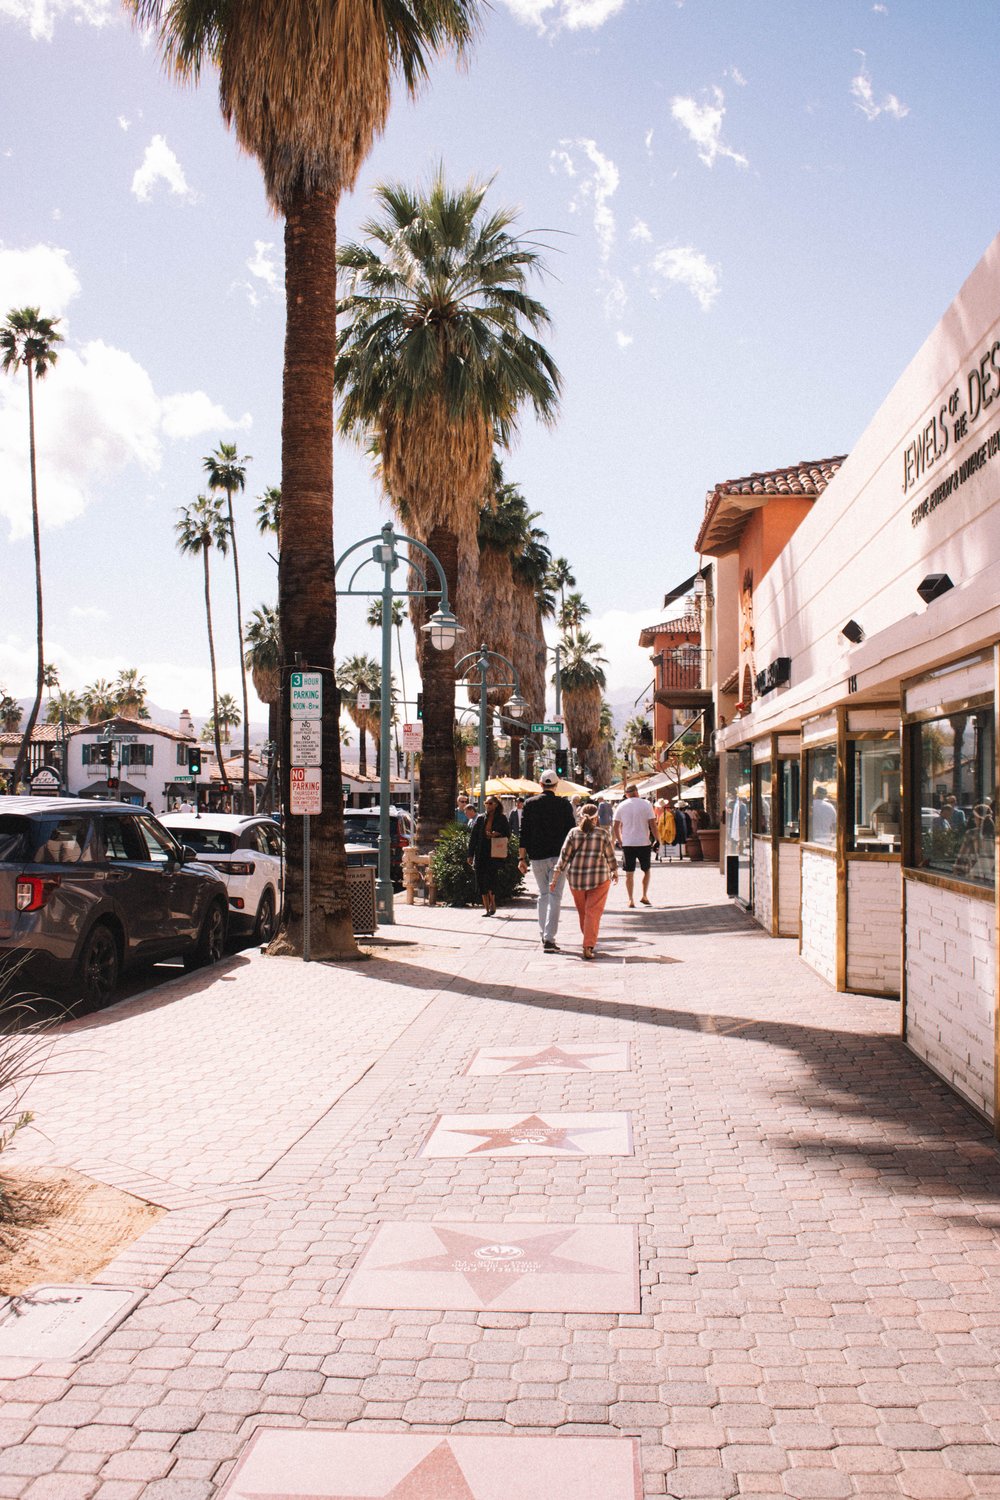 Ten Things to Do In Palm Springs California | SaltWaterVibes